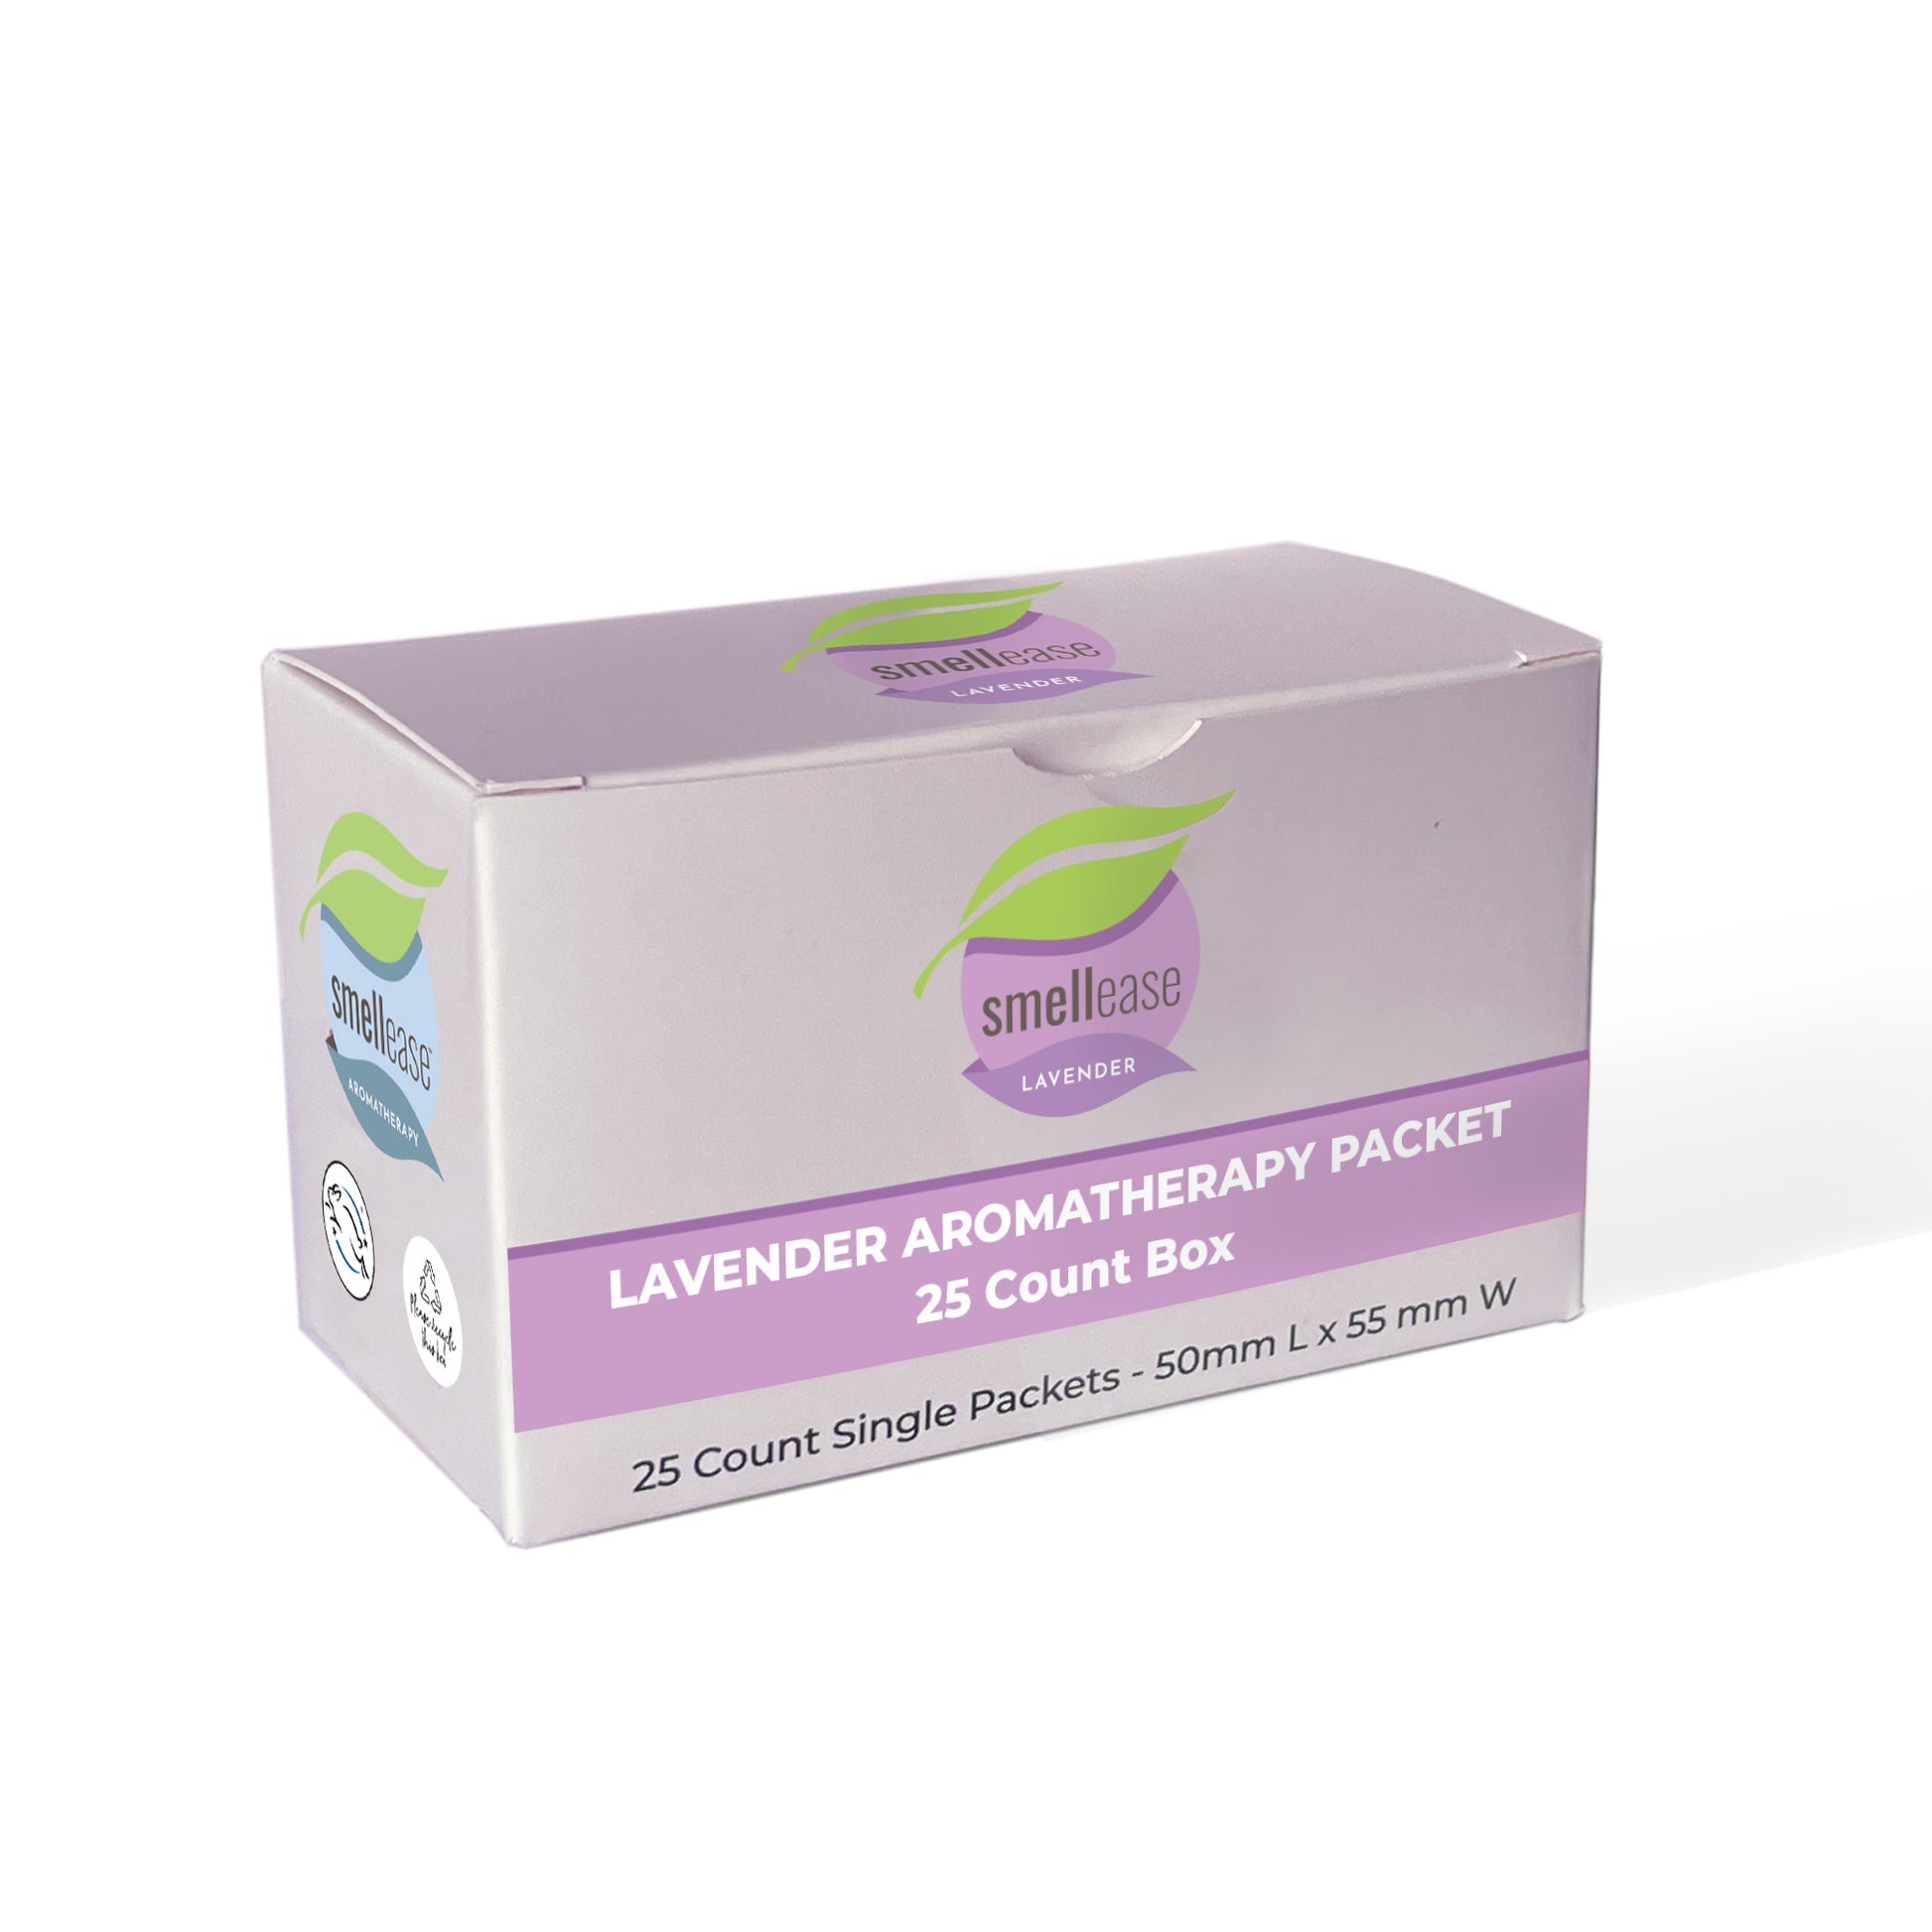  Lavender Aromatherapy Packet 25 Count Box Plant Therapy Perfumarie